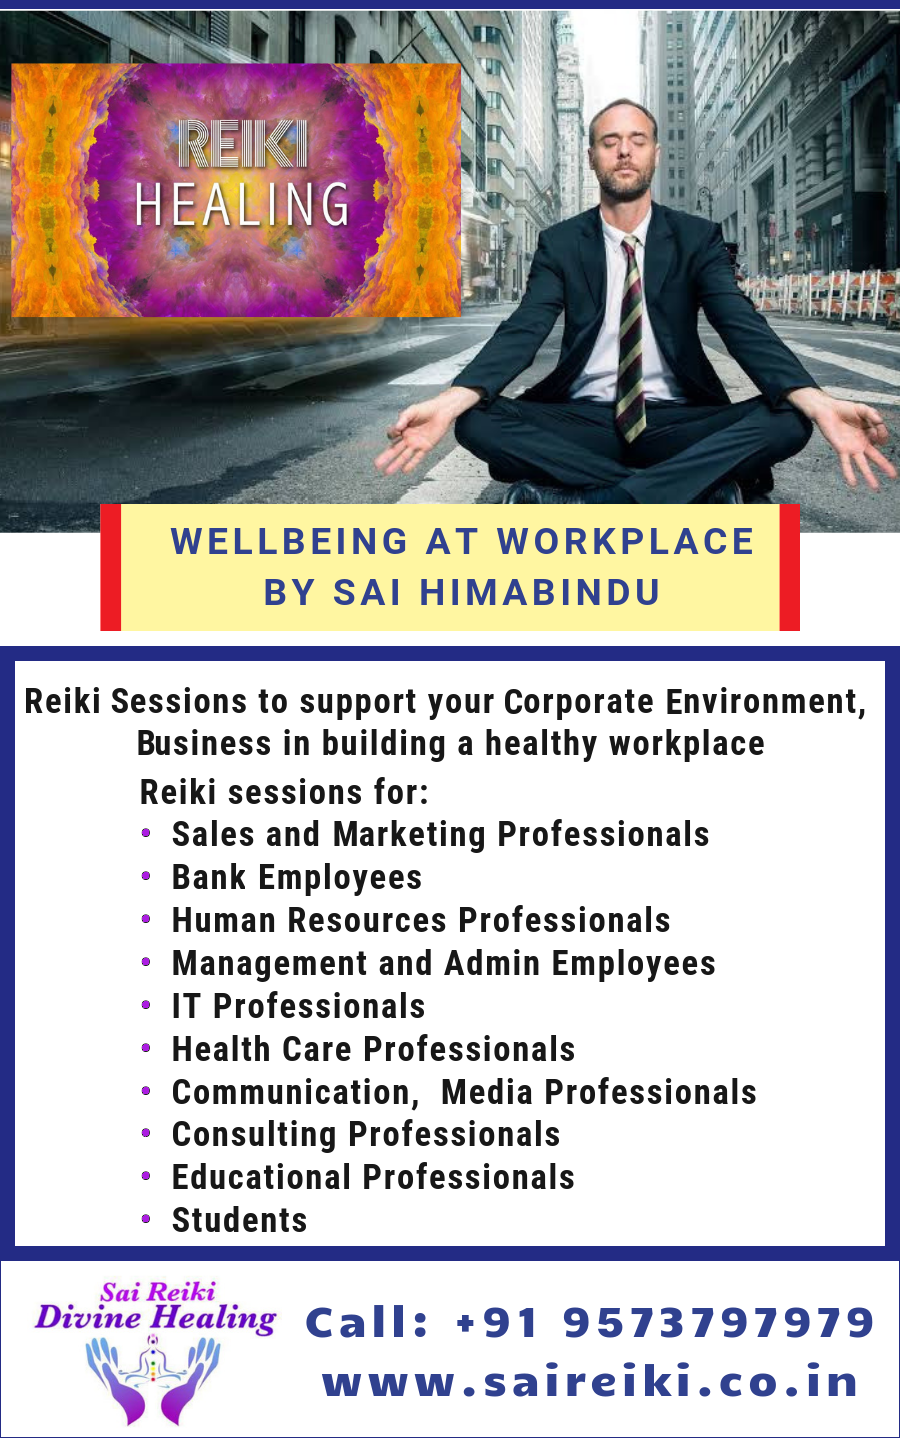 Wellbeing and Stress Management at workplace by Sai Hima Bindu - Sharjah